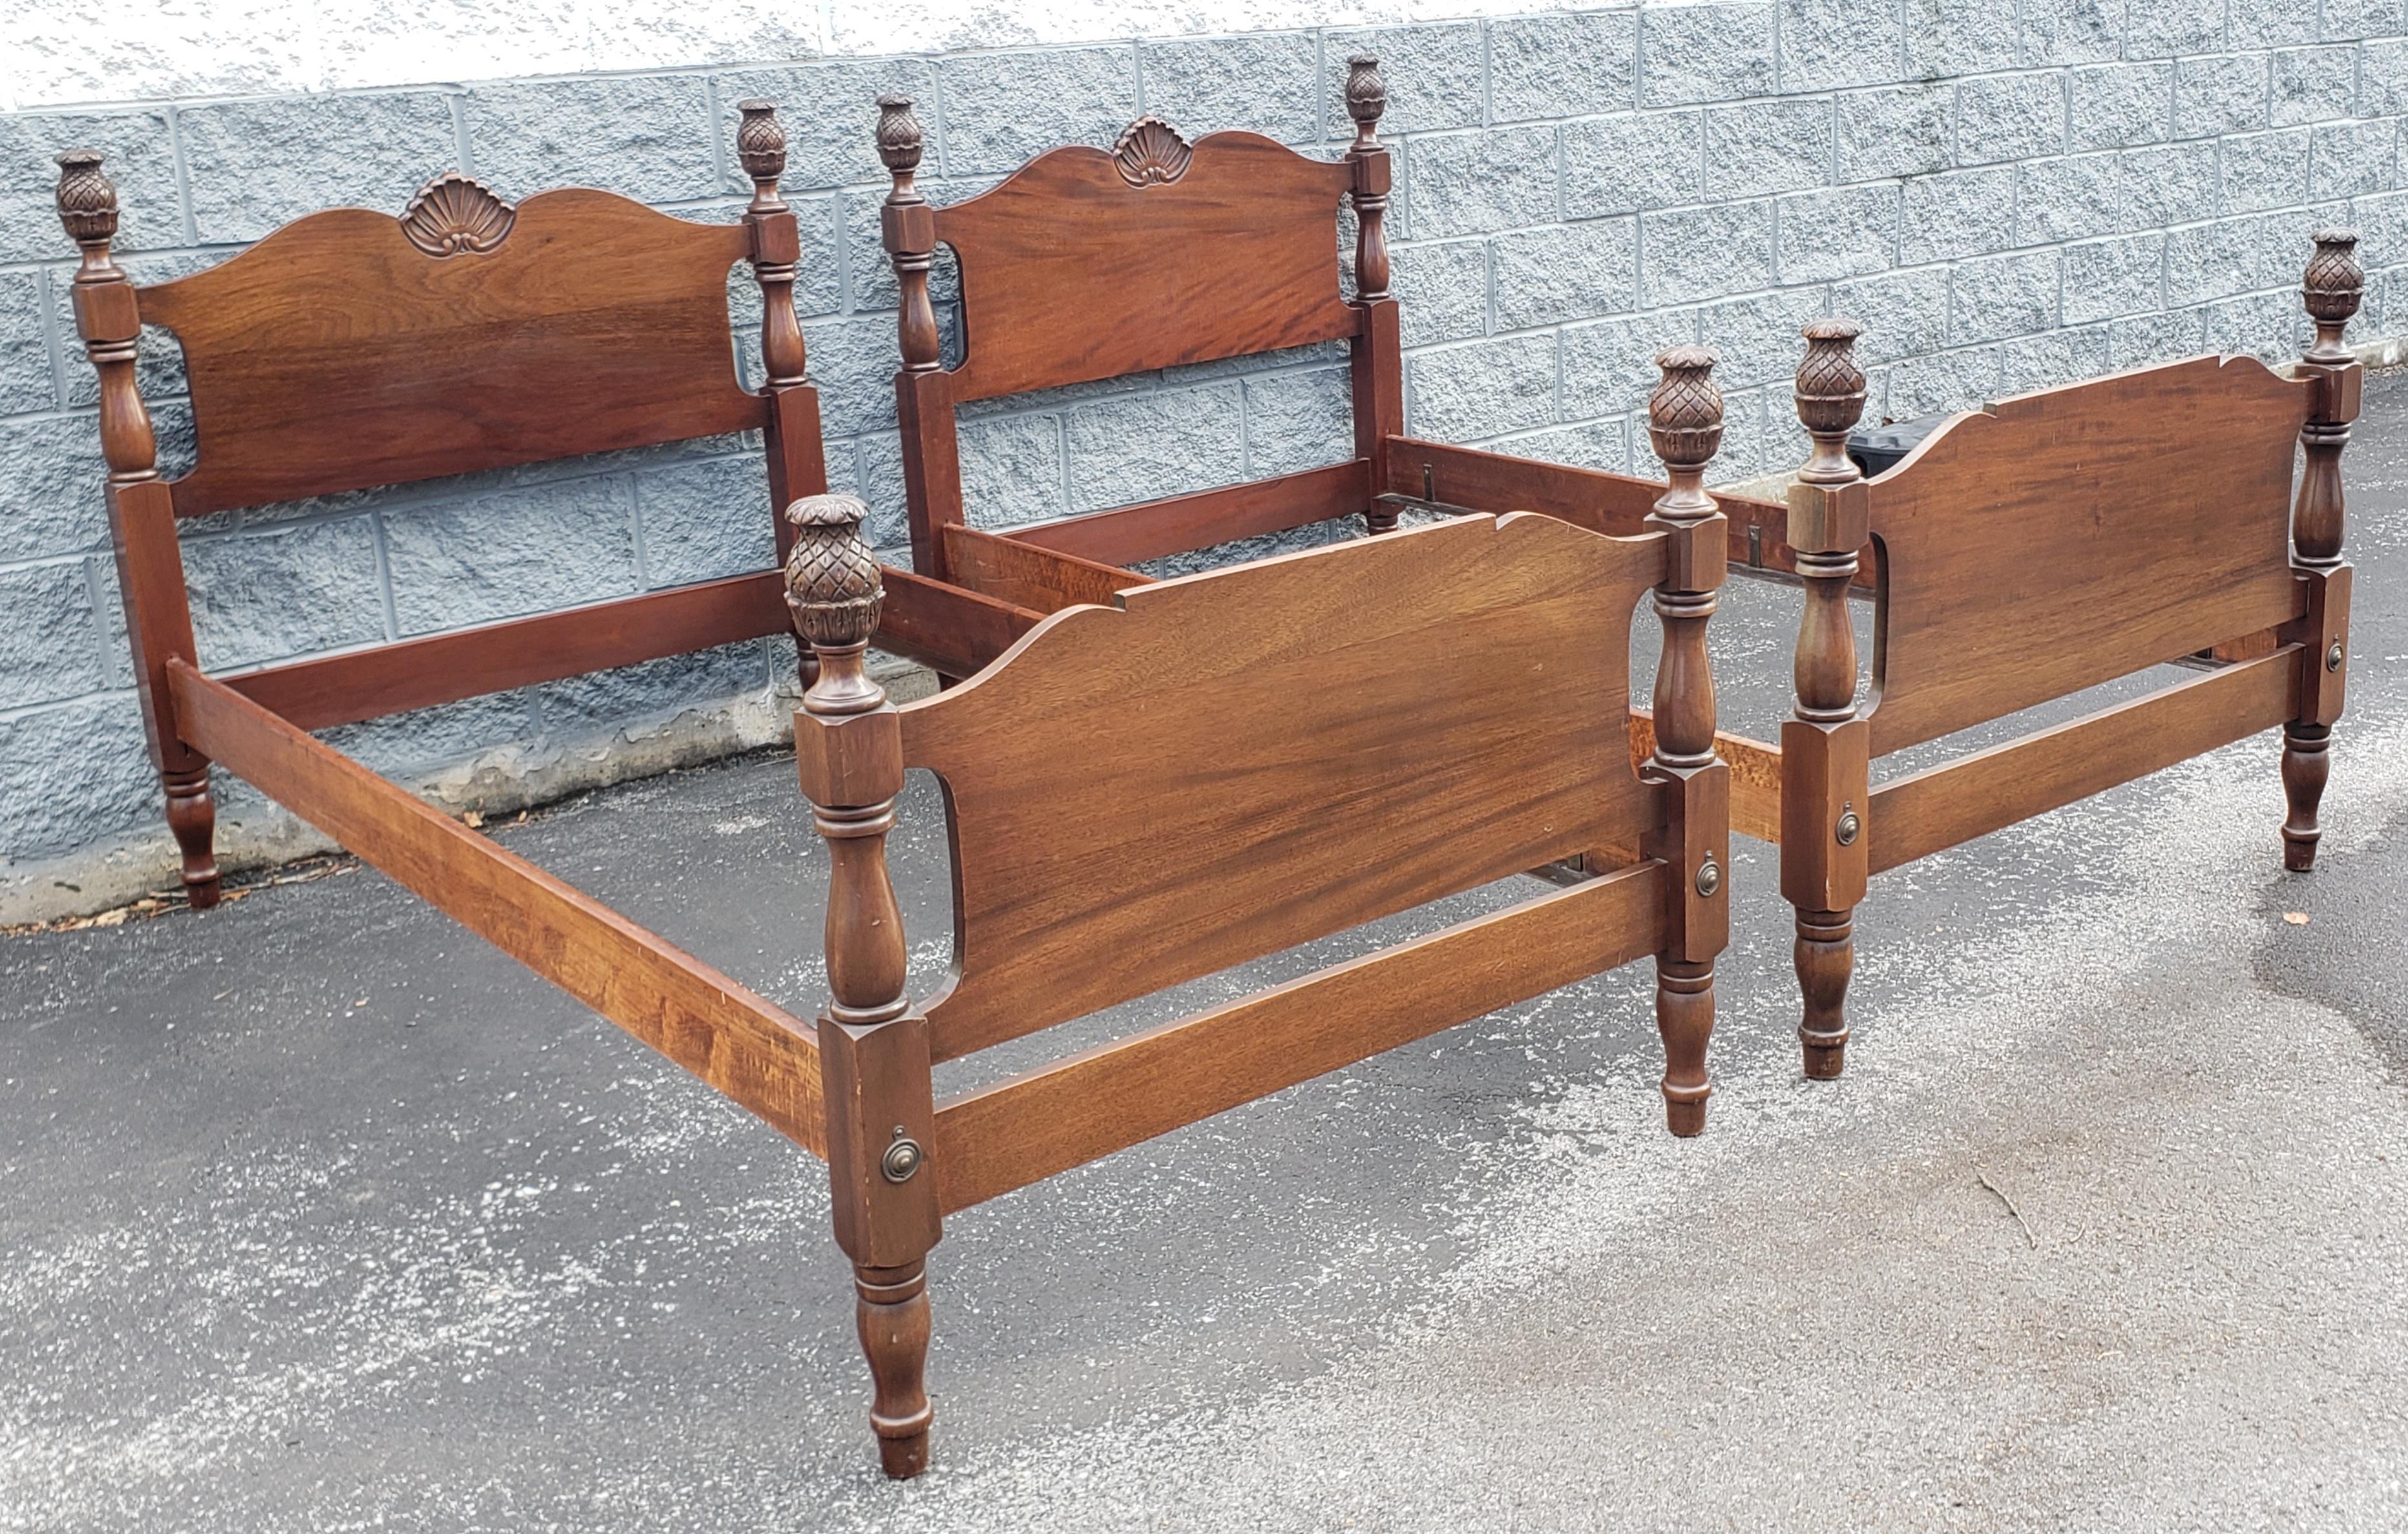 Pair of 1950s Staton Trutype Certified Genuine Mahogany Pineaple Twin Size Beds in very good vintage condition. Superior craftmanship with patented bed rails with wood and iron.  Has been refinished a few year ago. Measures 81.5